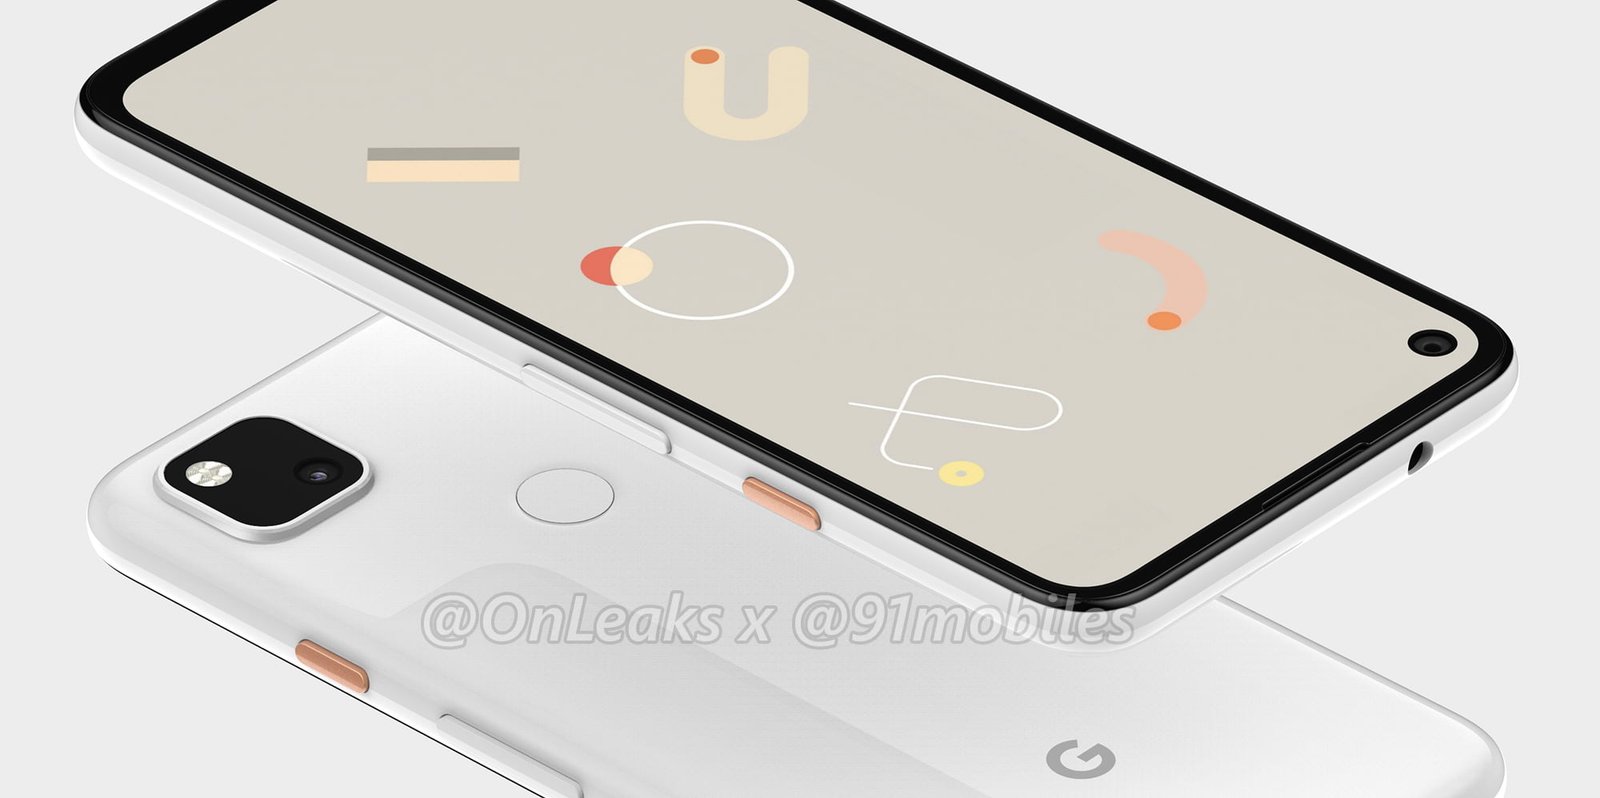 Google Pixel 4a To Have Punch Hole Display and Single Camera